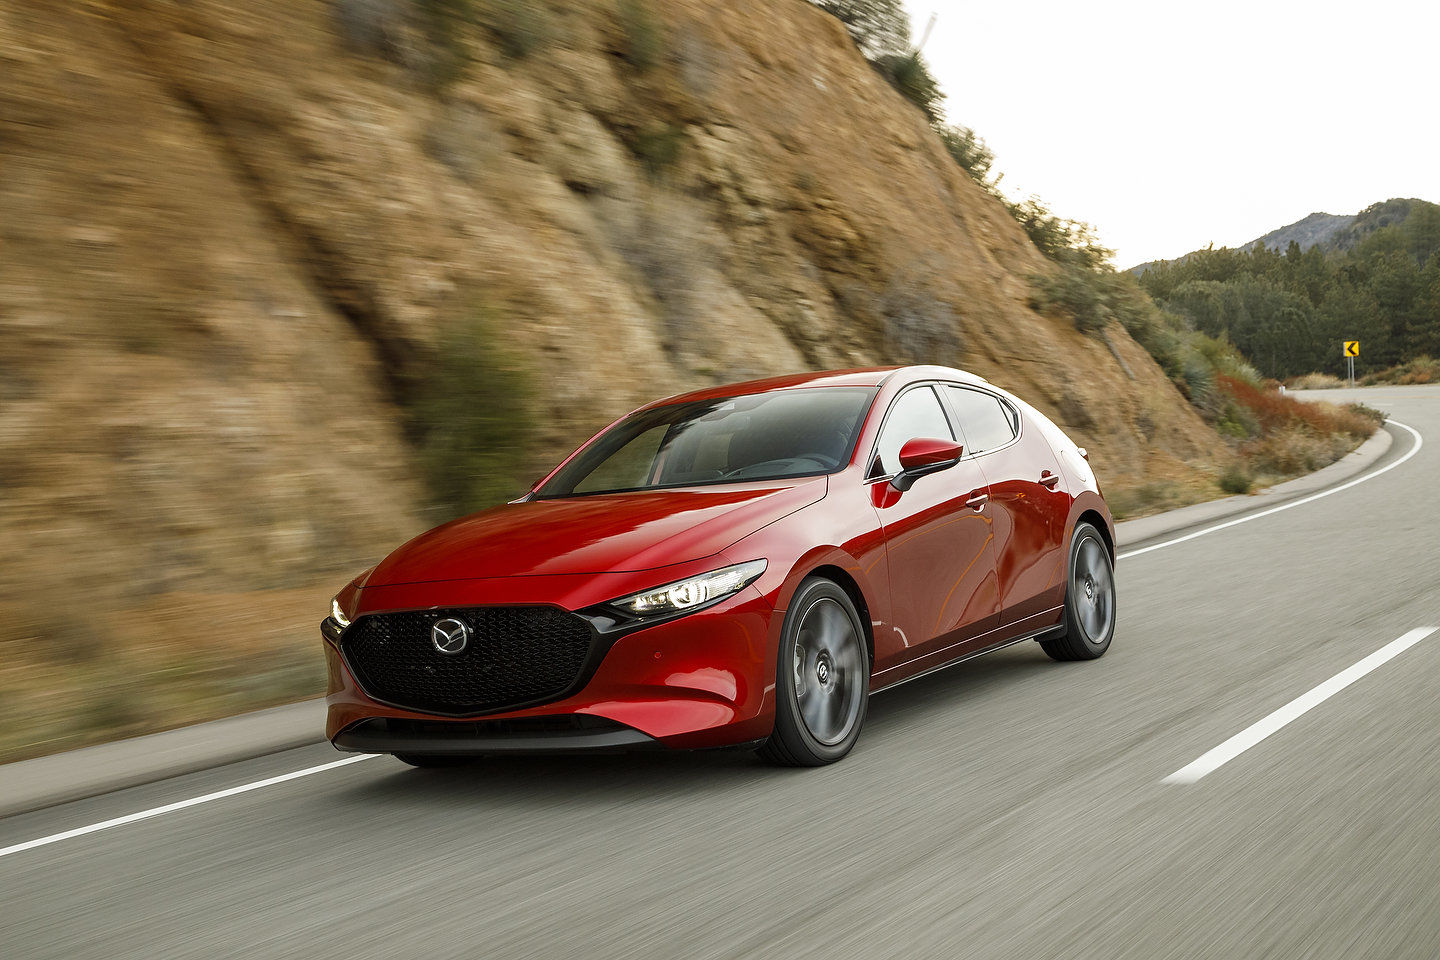 A quick look at the recent 2019 Mazda3 reviews